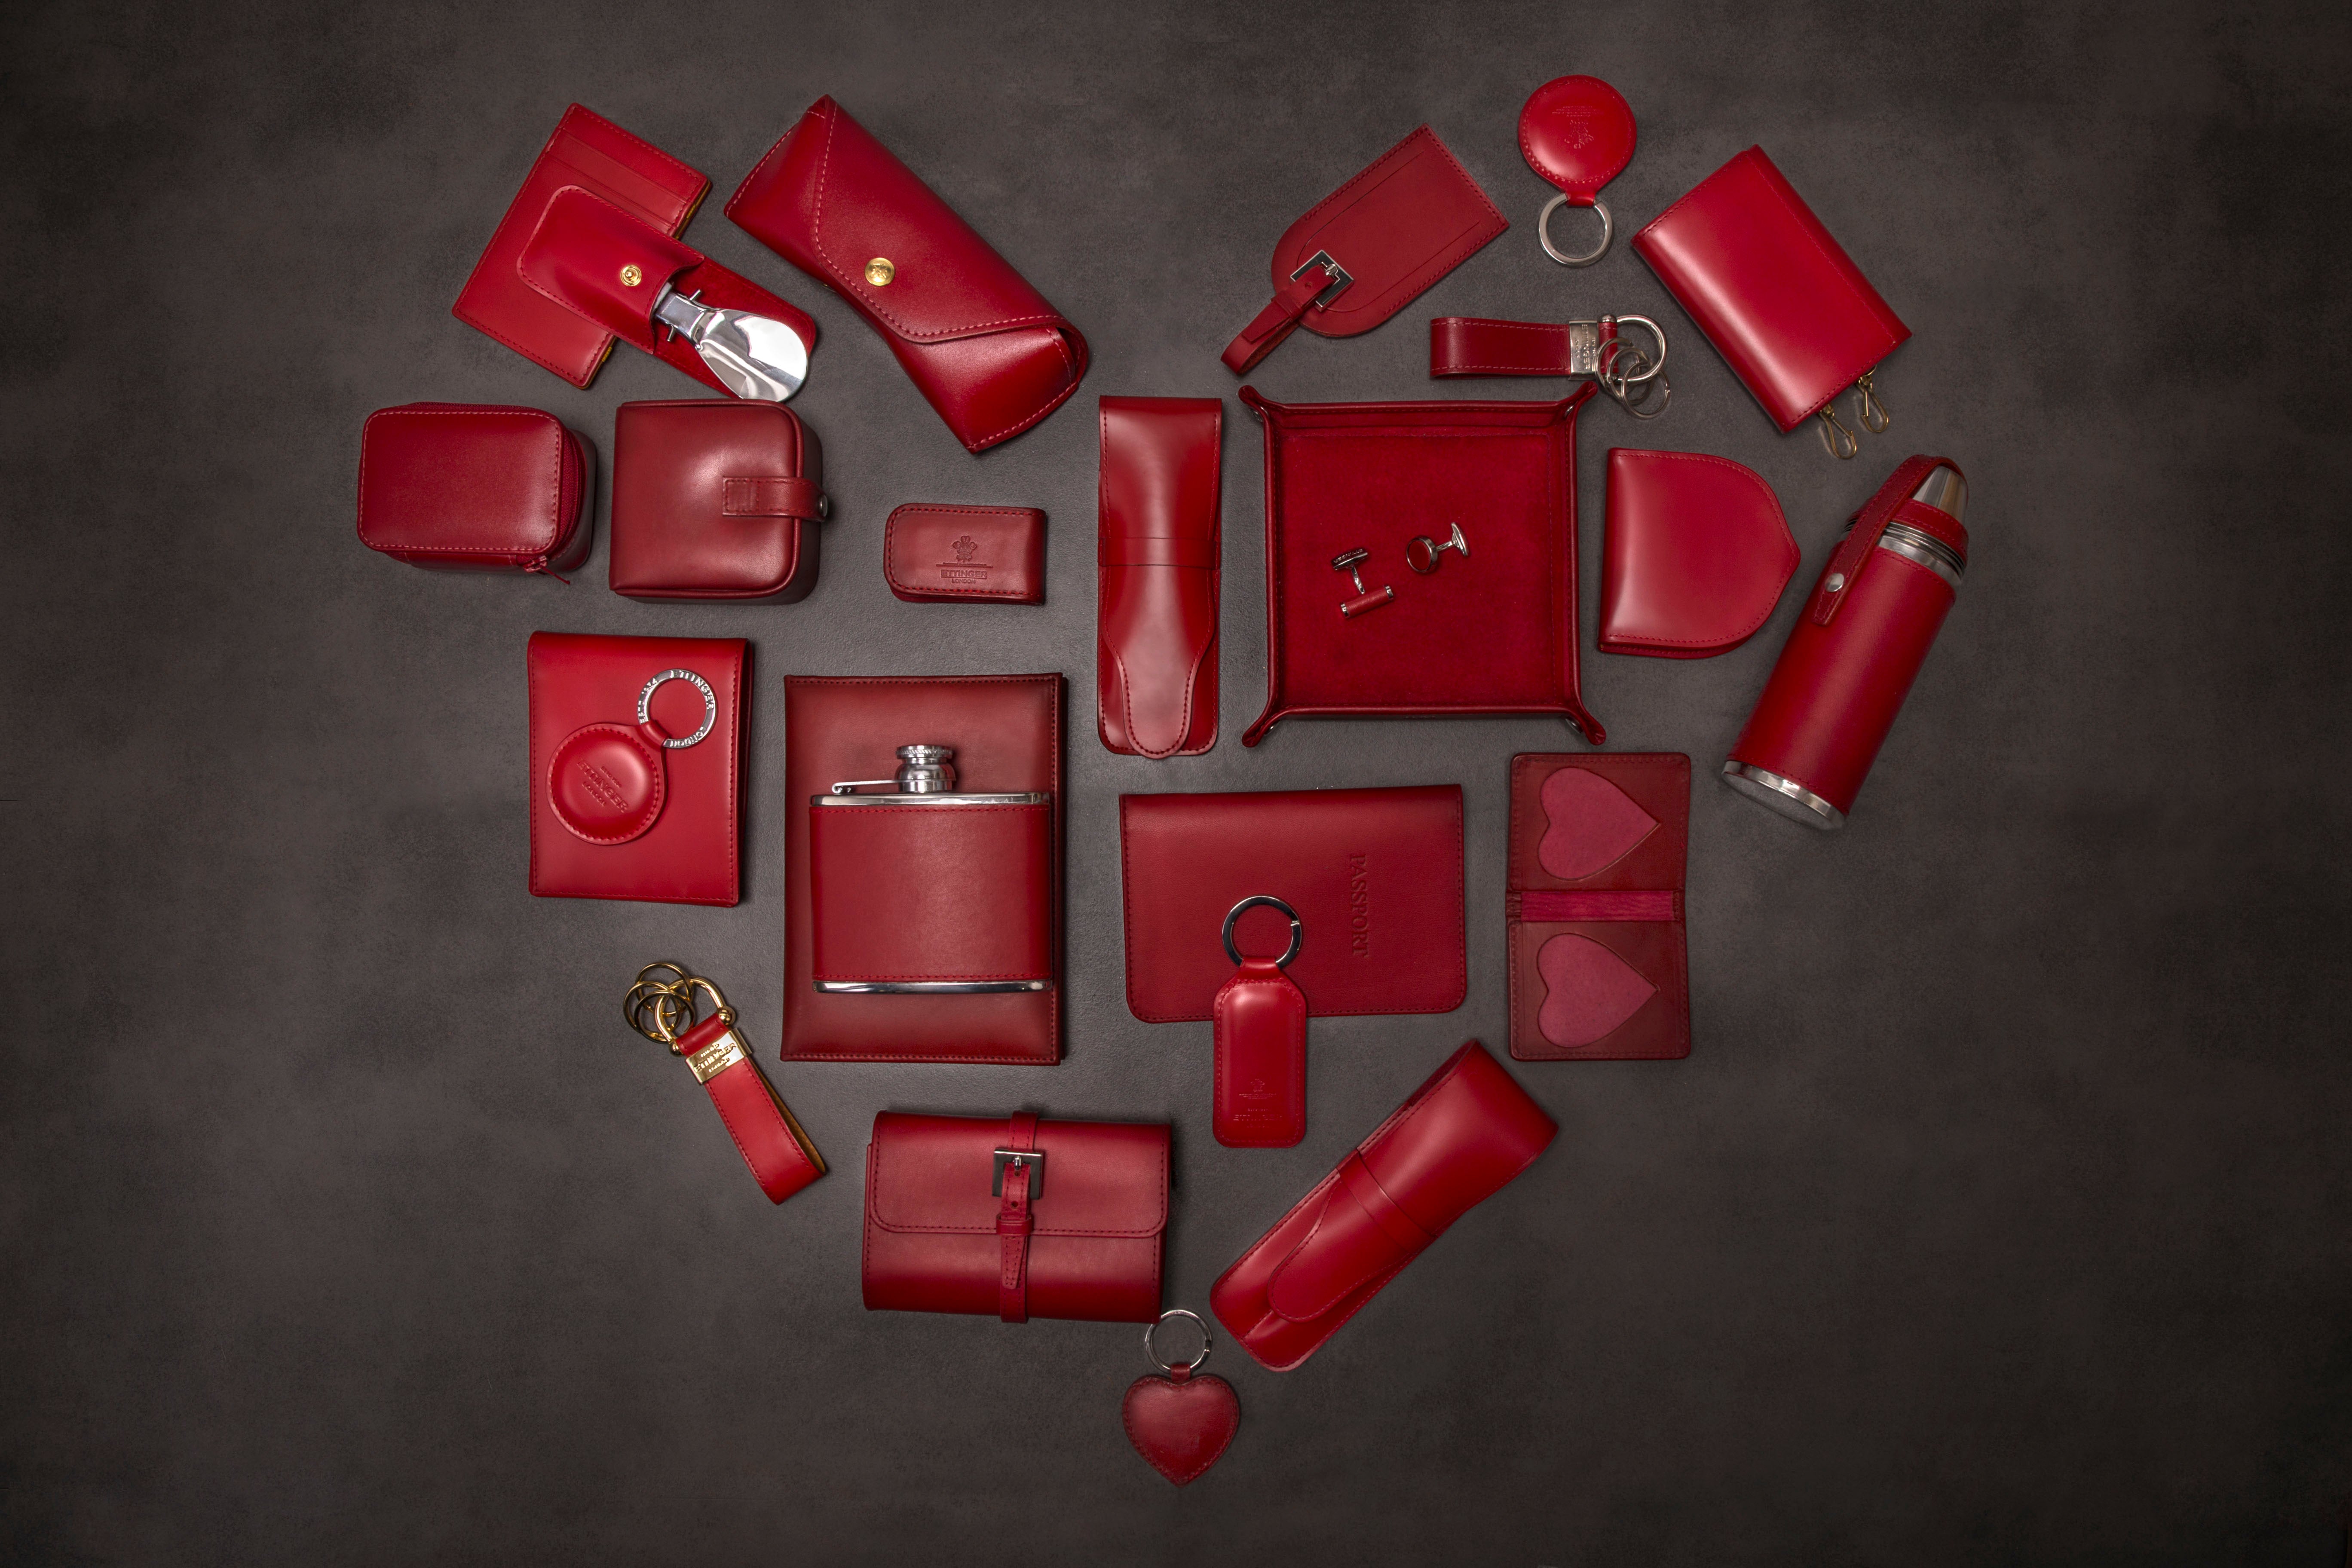 Ettinger Valentines Day, valentines day gifts,  gifts for valentines day